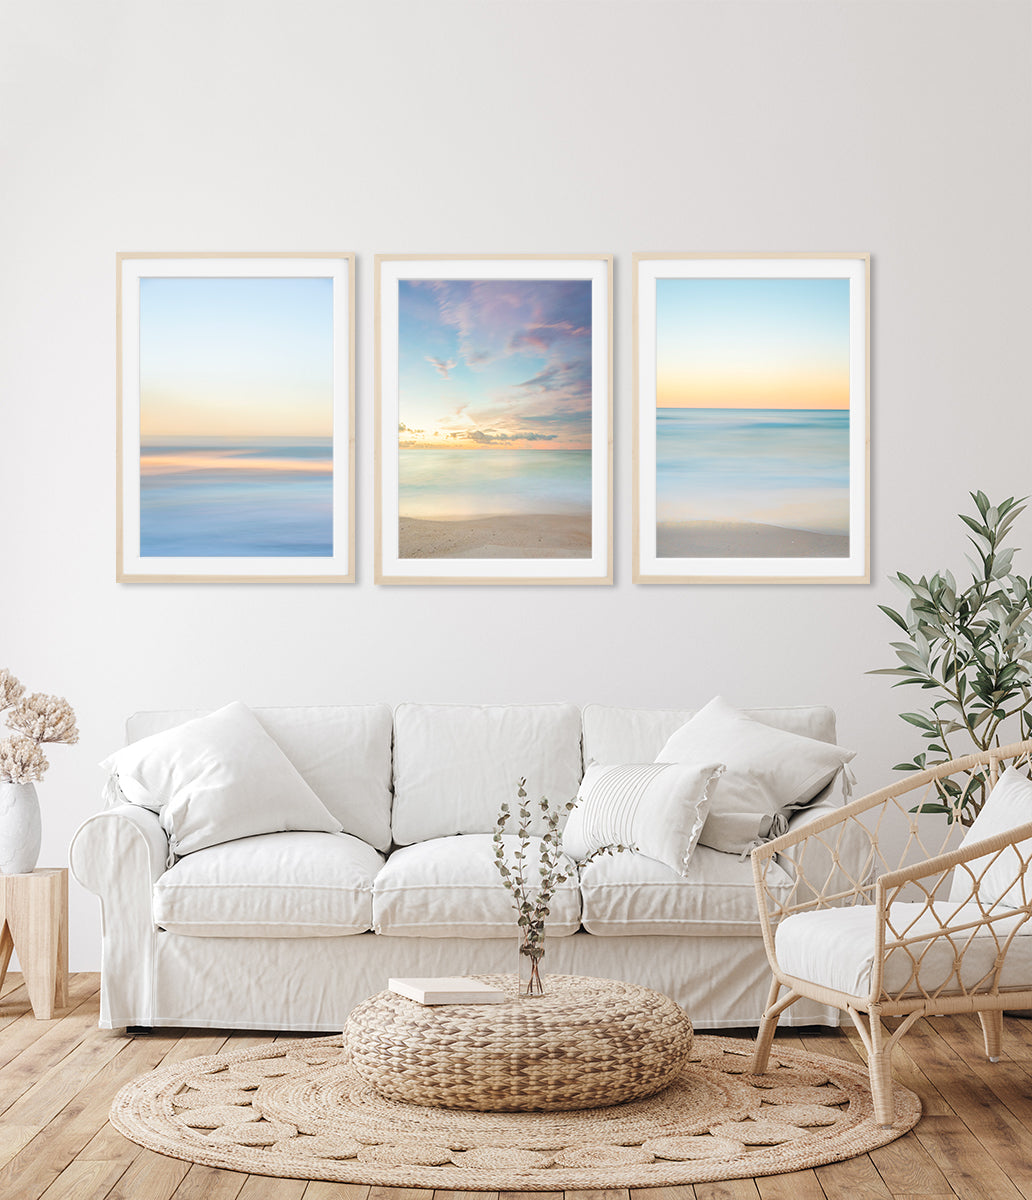 Blue Abstract Beach Prints Set Of 3